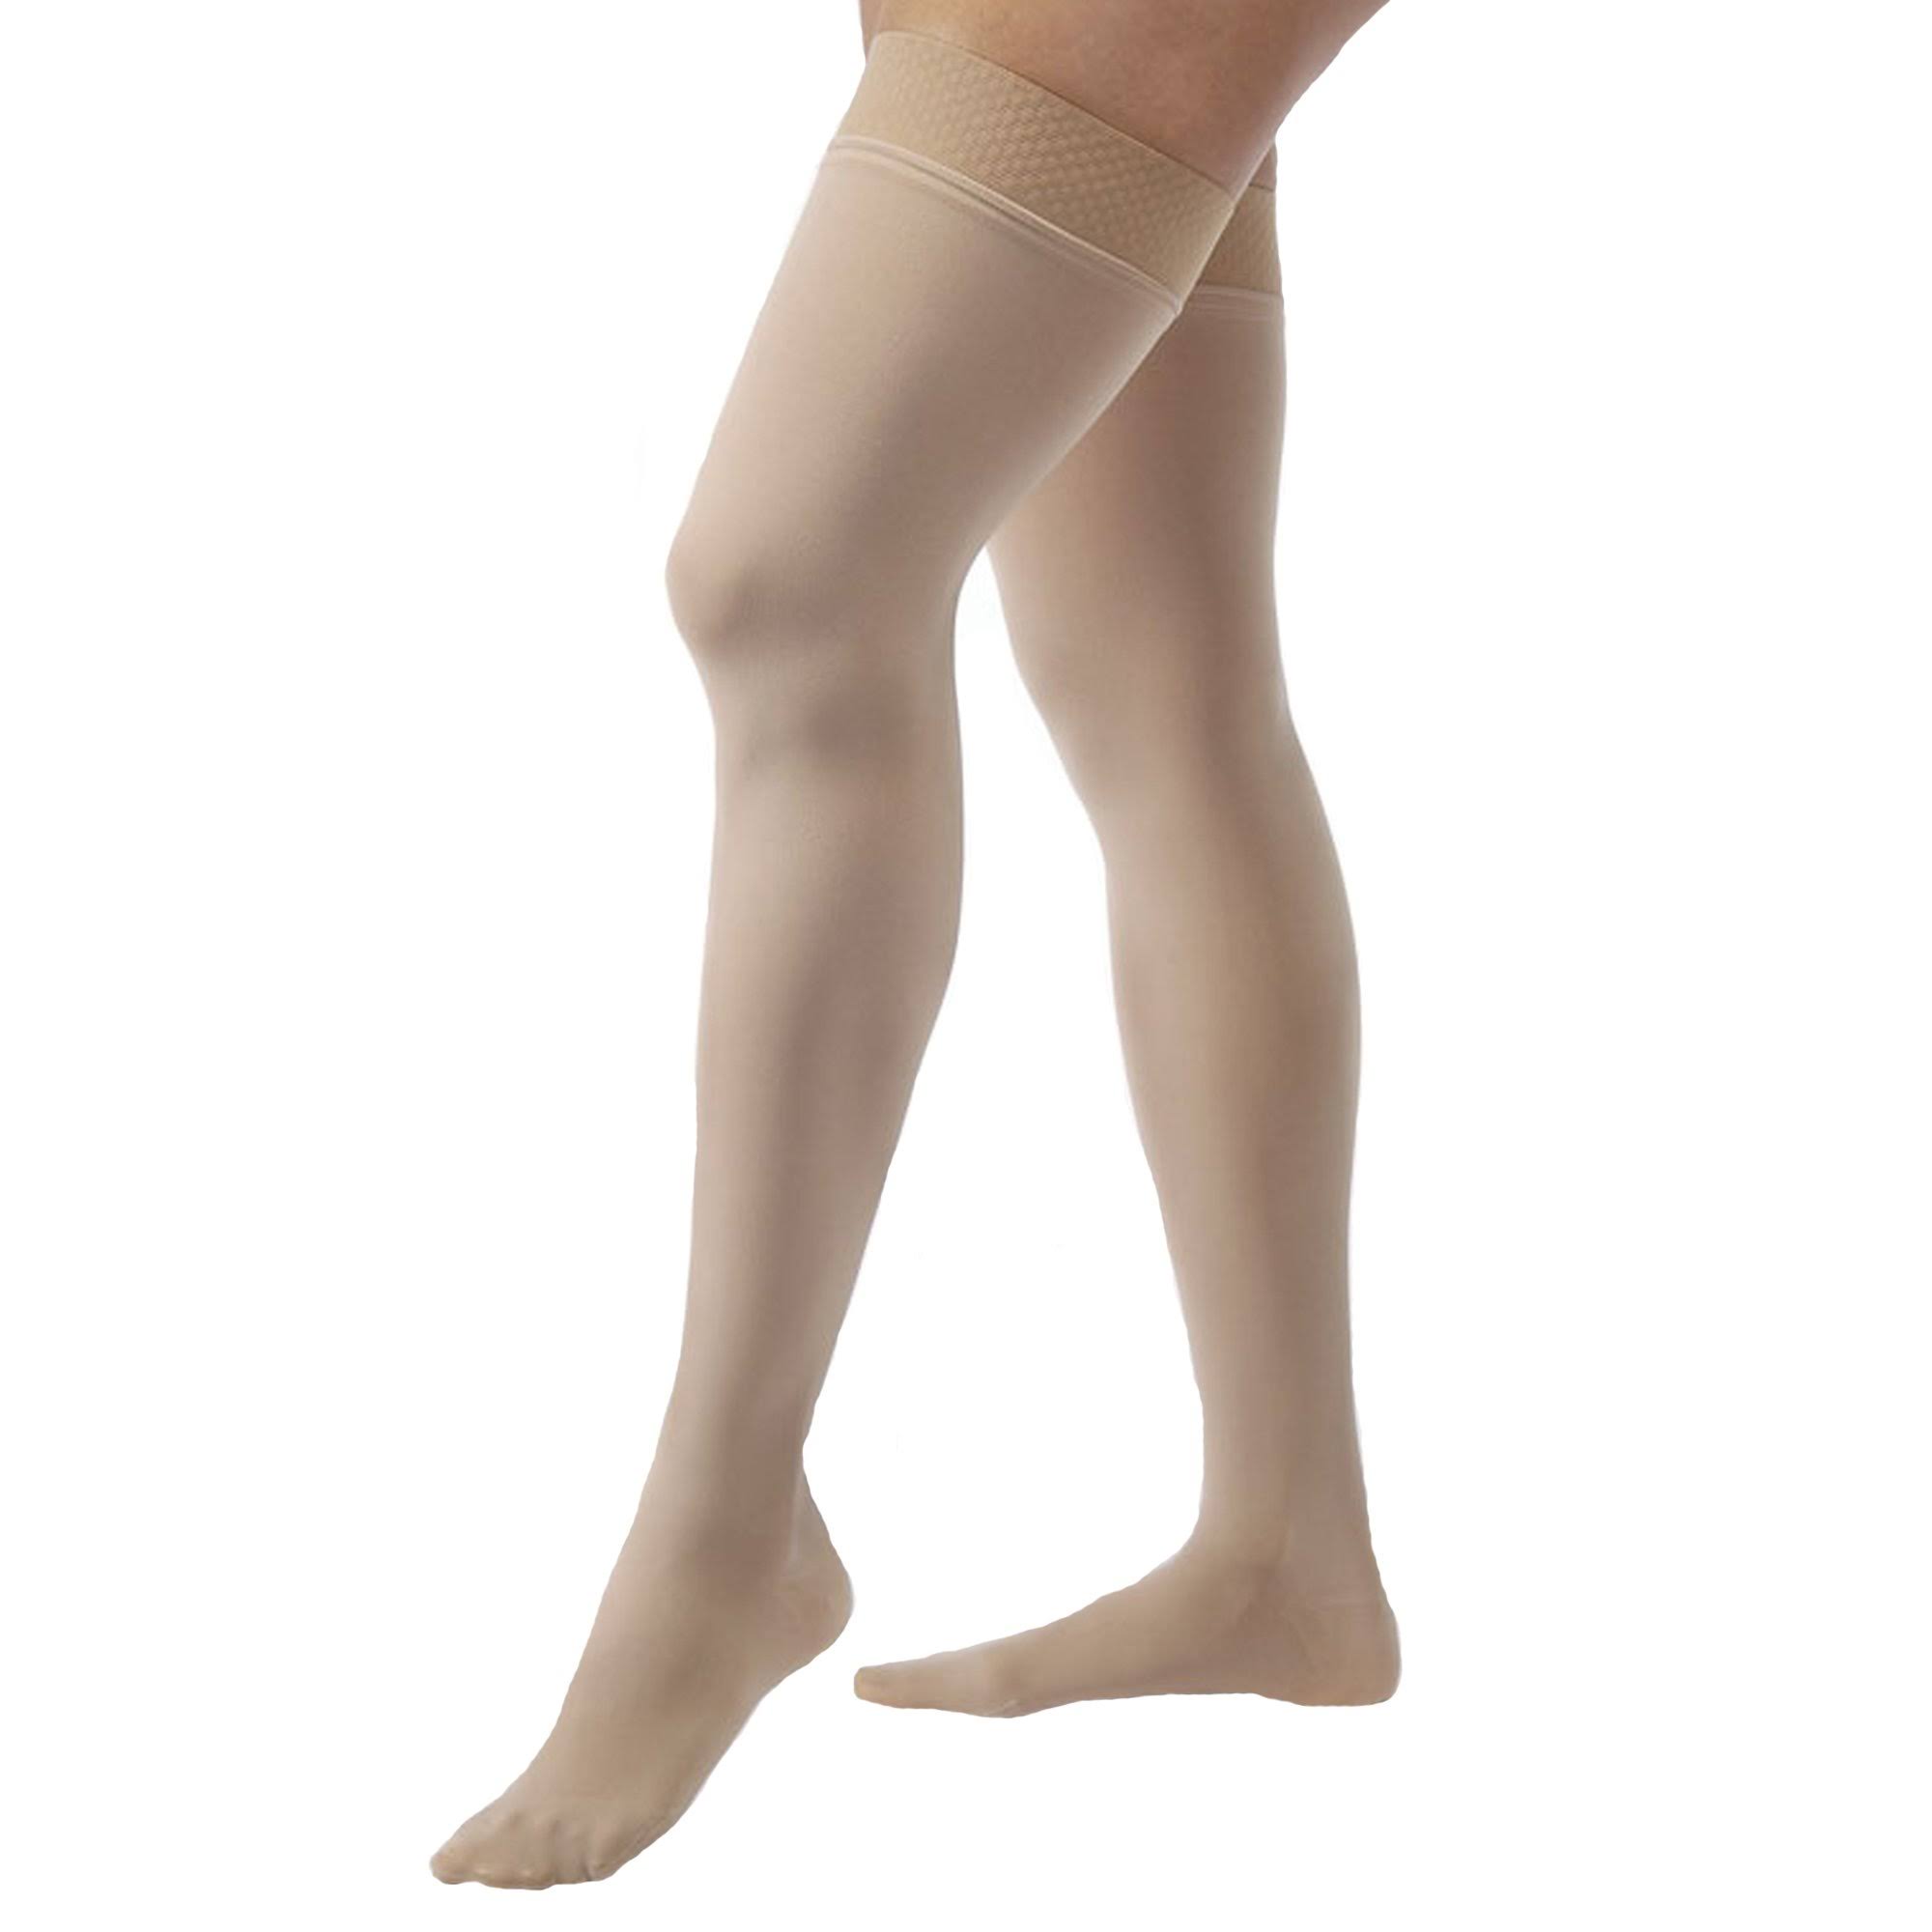 Jobst Firm Compression Thigh High Open Toe Stockings - Black, Medium